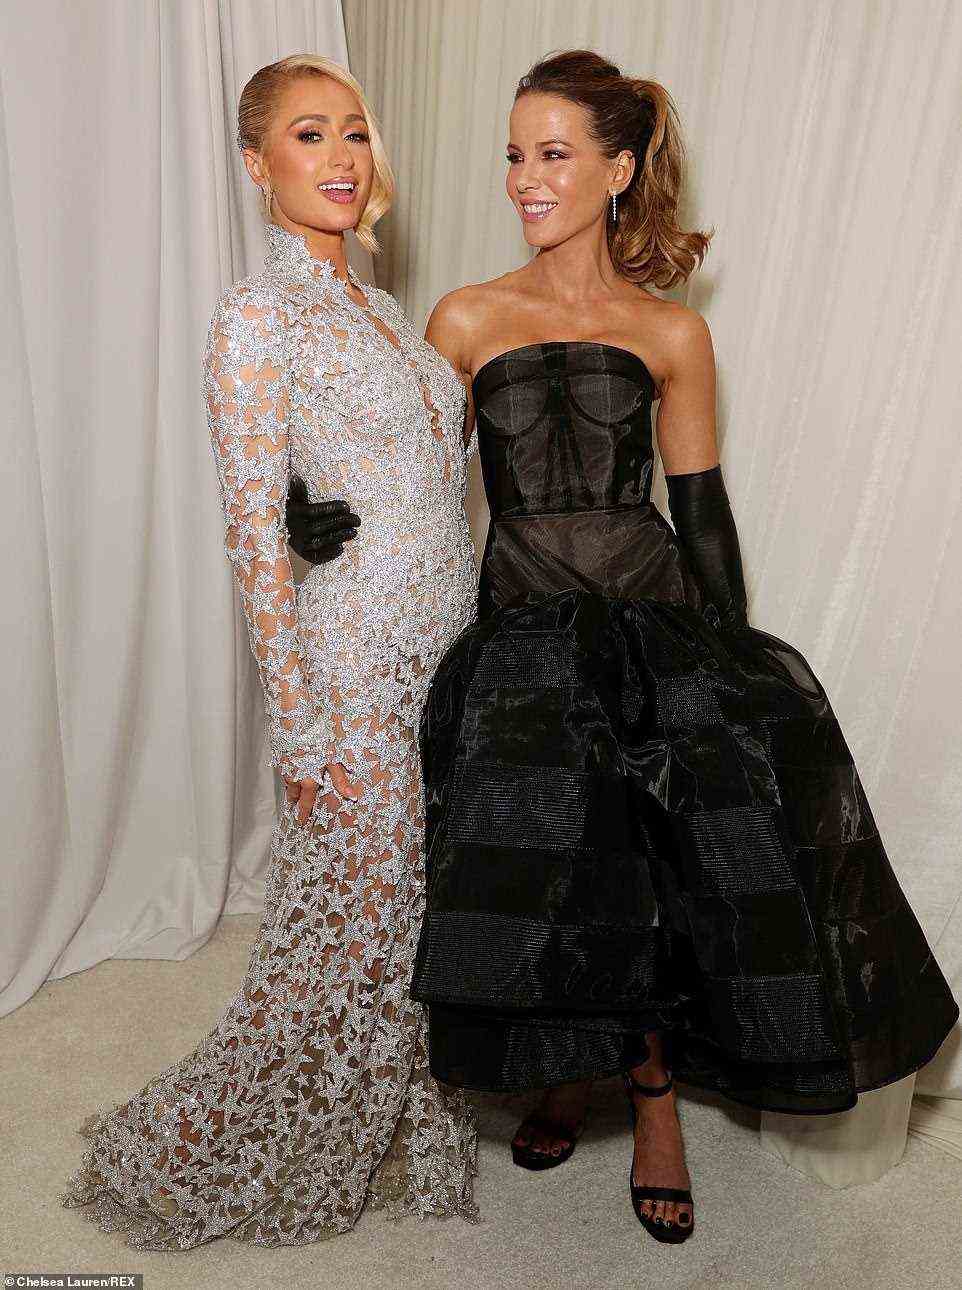 Famous friends: Paris posed with her friend, A-list actress Kate Beckinsale, who wowed in black